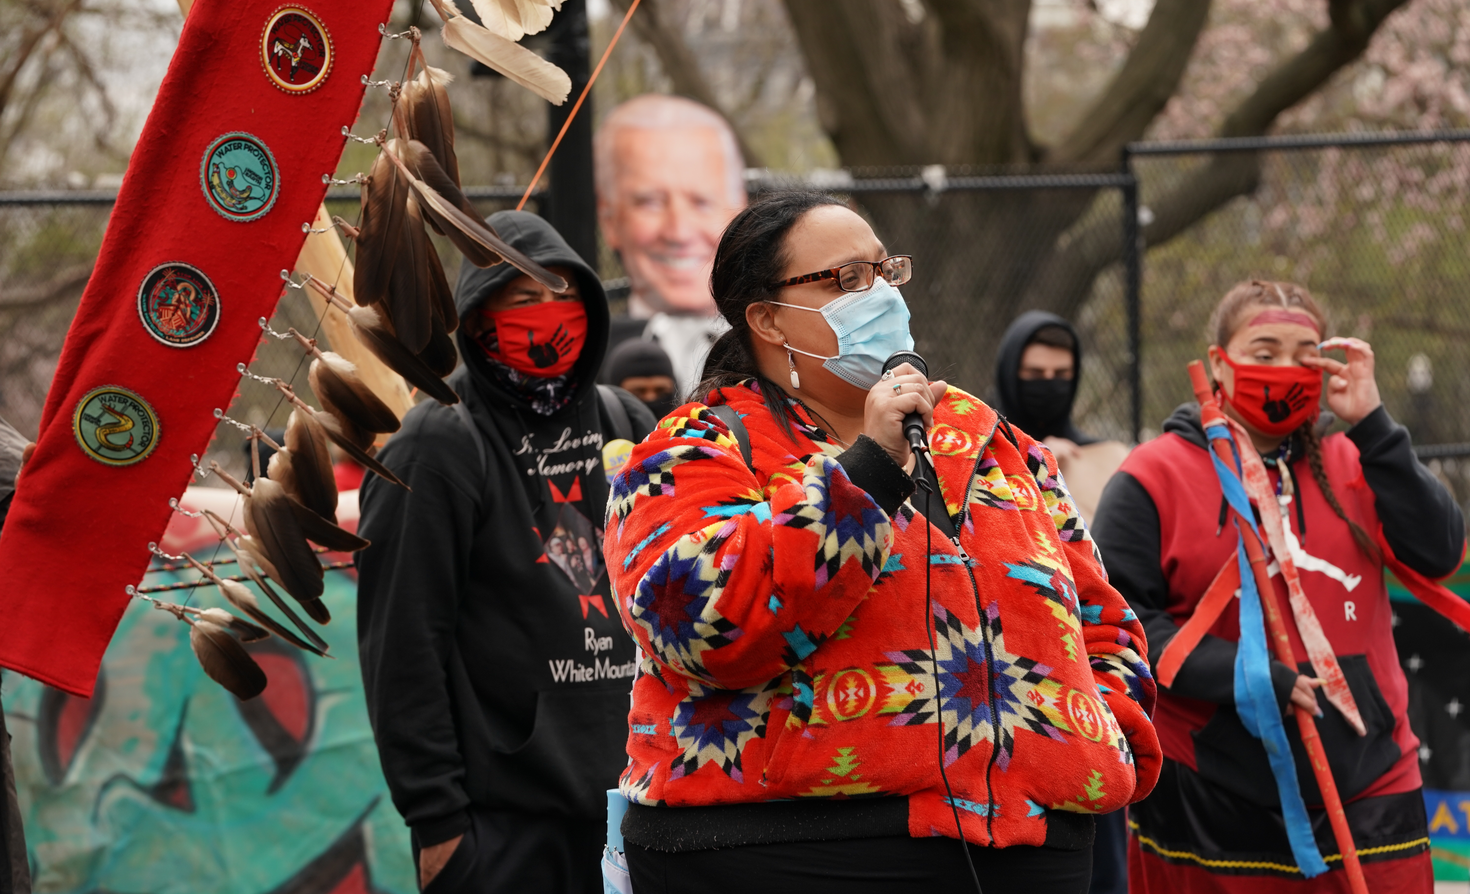 An indigenous woman speaks at the White House about the need to shut down the DAPL and Line 3 oil pipelines to preserve access to clean water.